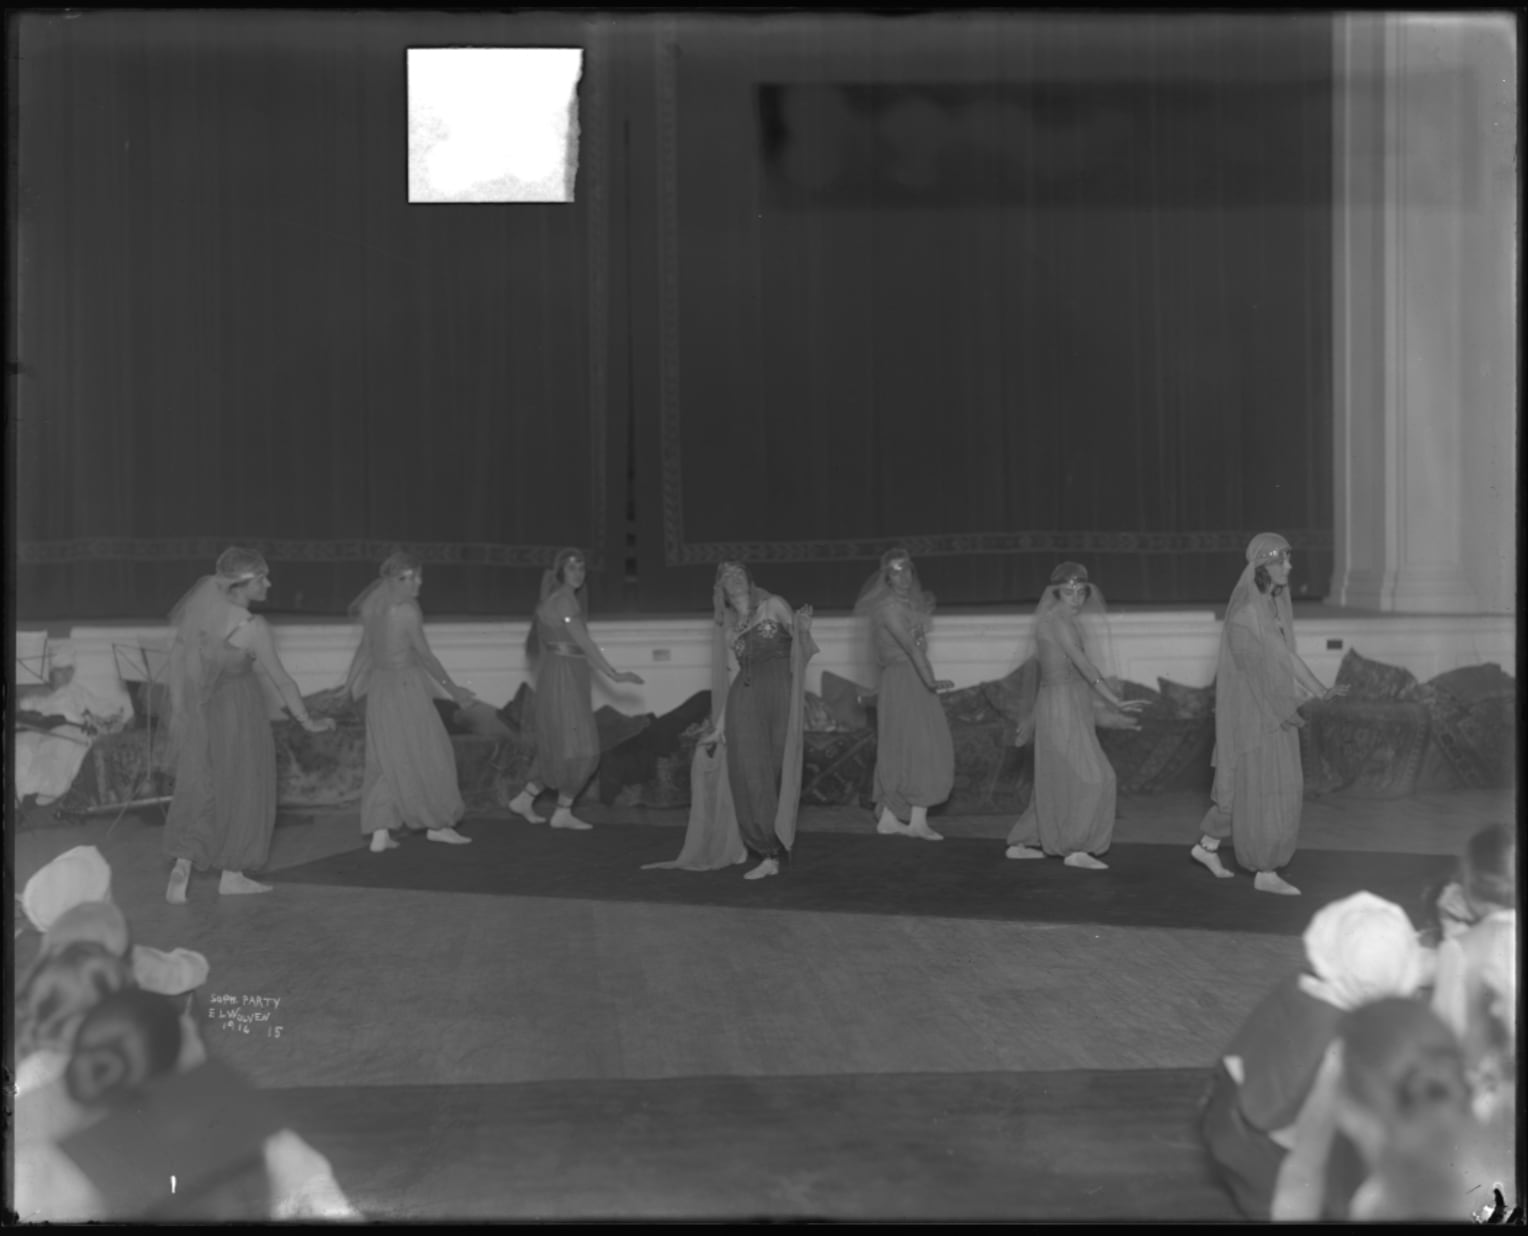 A black-and-white historical photo of people inside a theater, performing in costumes that are intended to appear Middle Eastern.